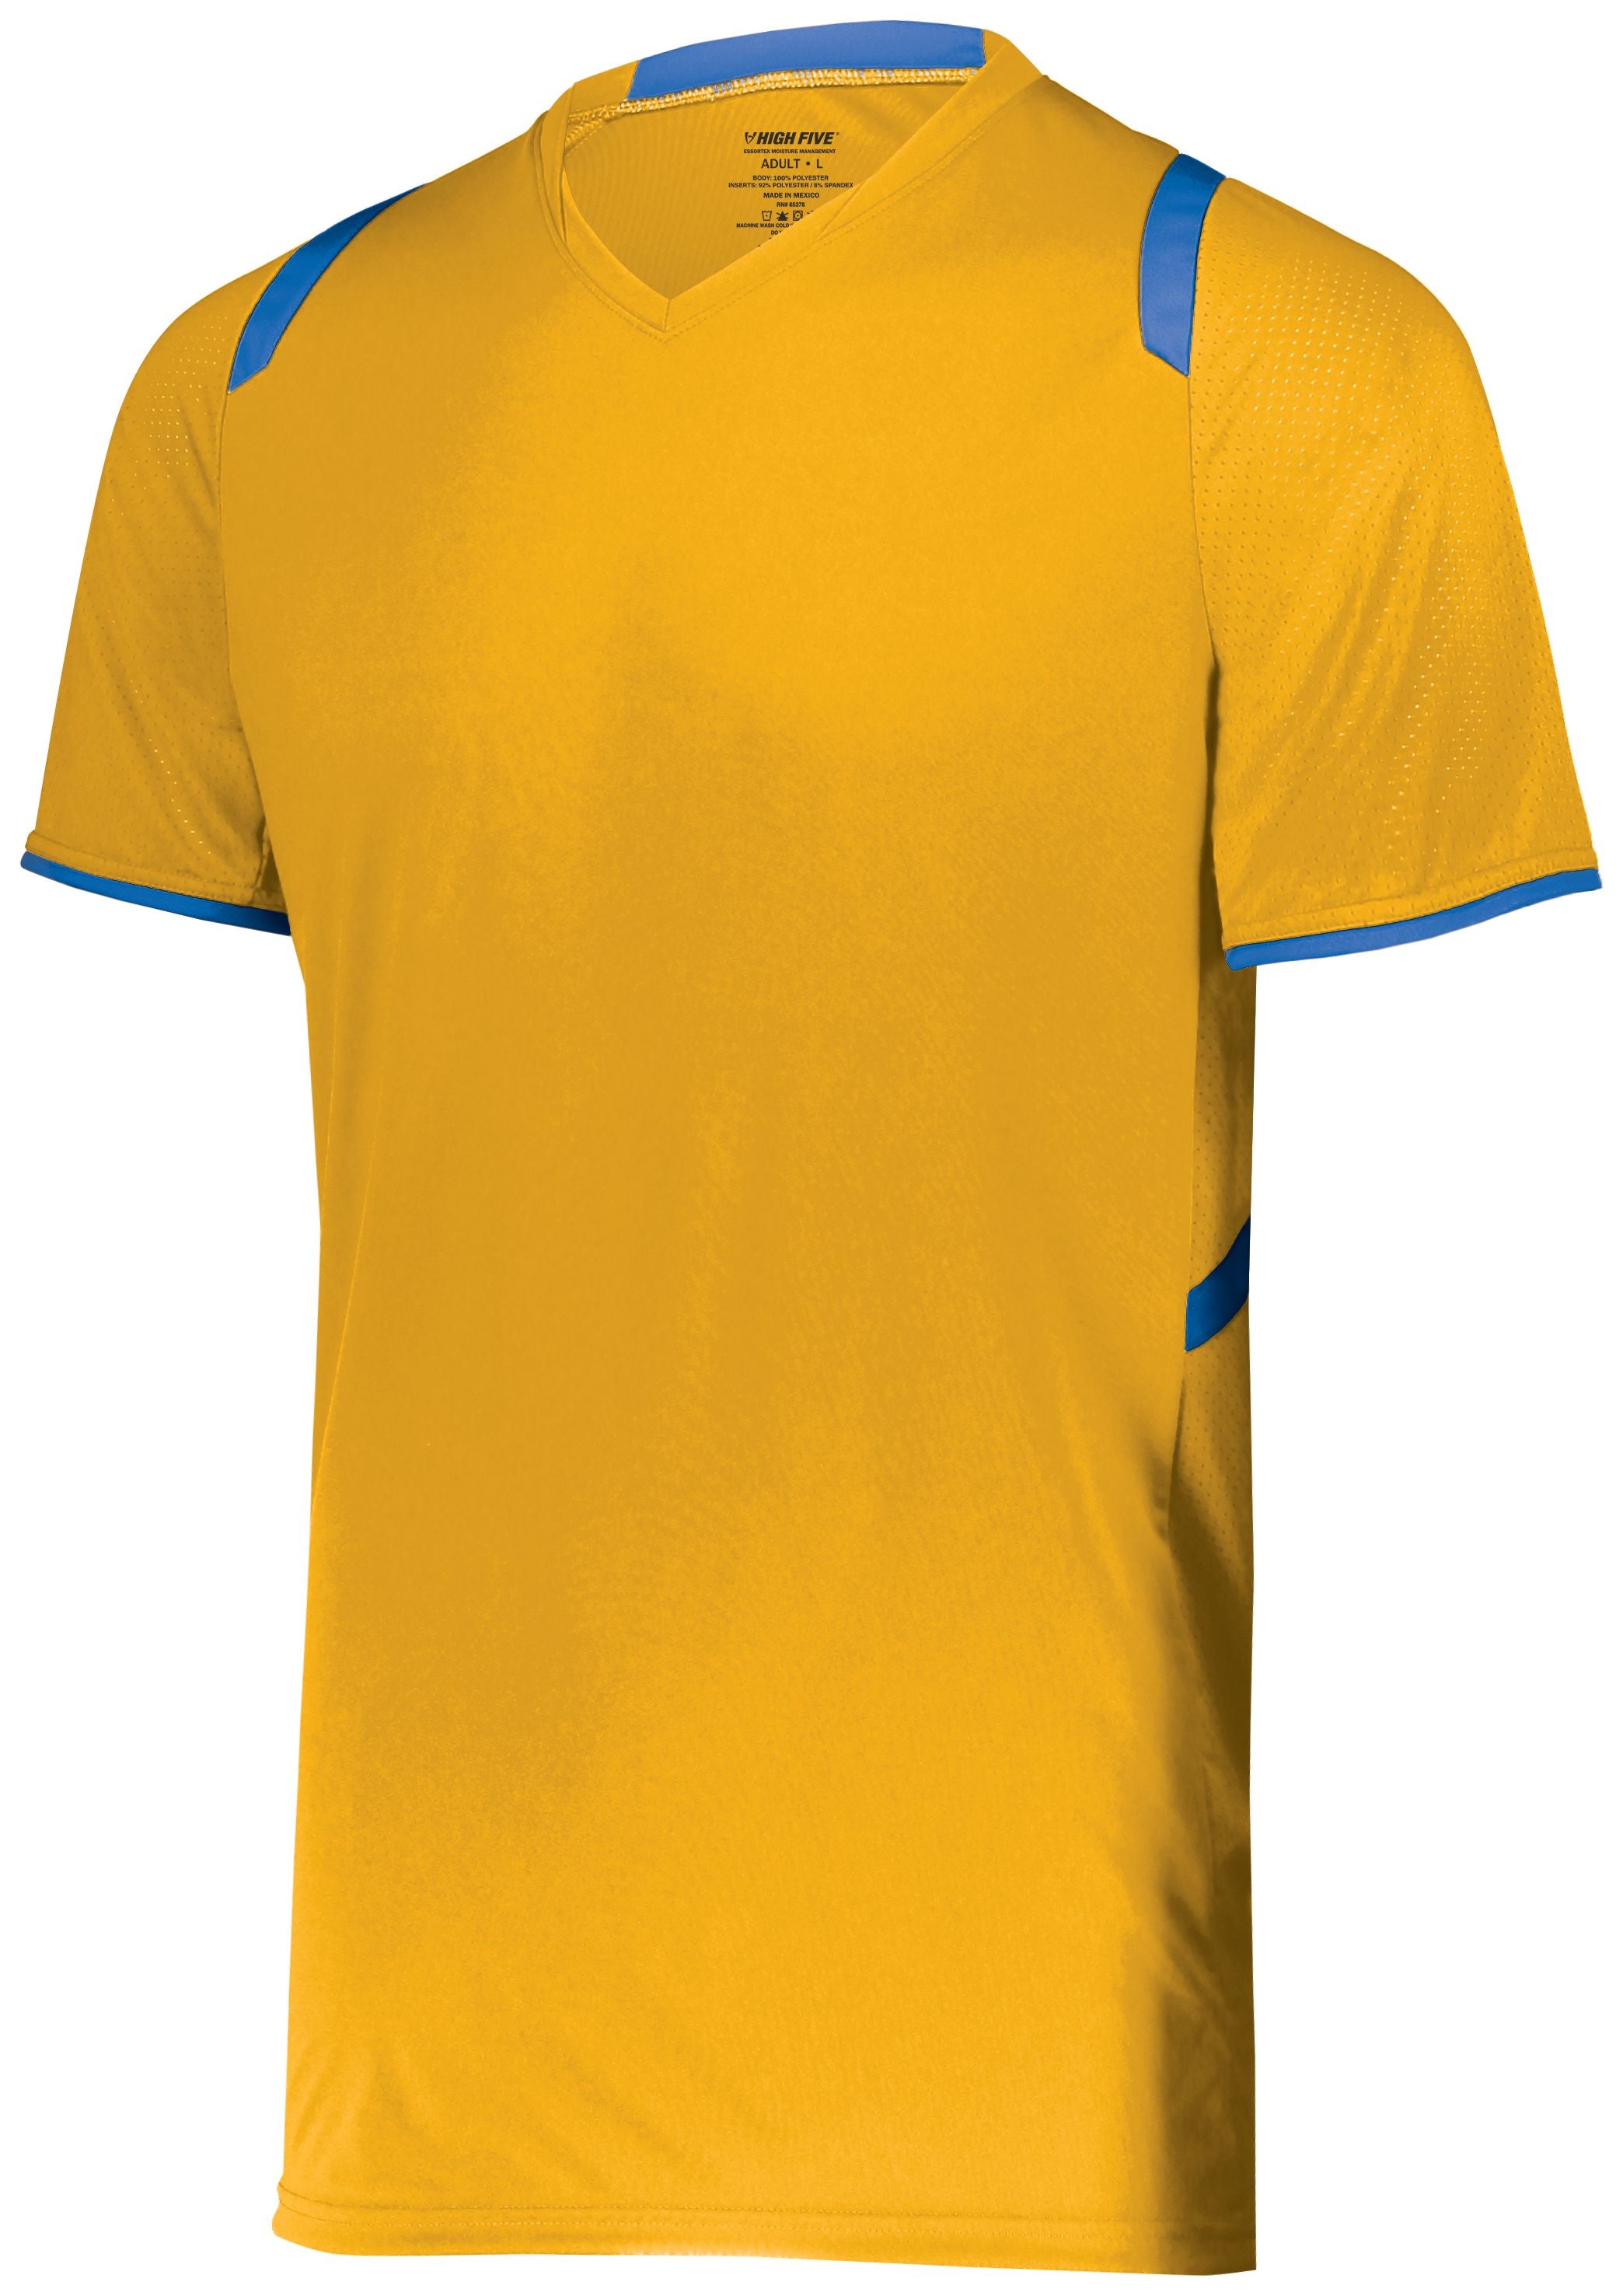 YOUTH MILLENNIUM SOCCER JERSEY from High 5